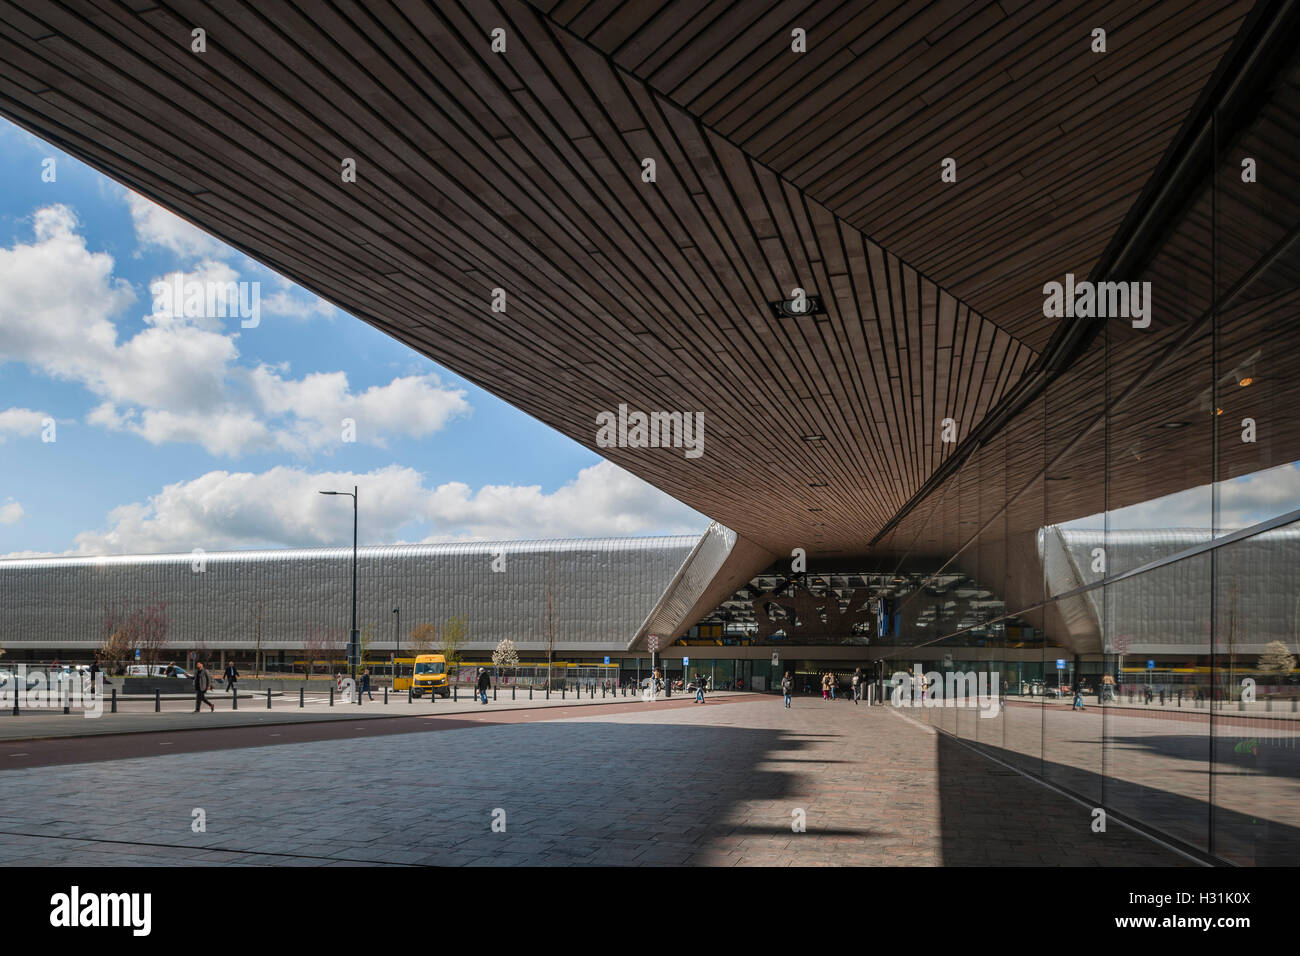 Lateral entrance to station showing wooden ceiling. Centraal Station, Rotterdam, Netherlands. Architect: Benthem Crouwel Architects + MVSA Architects + Wes, 2014. Stock Photo